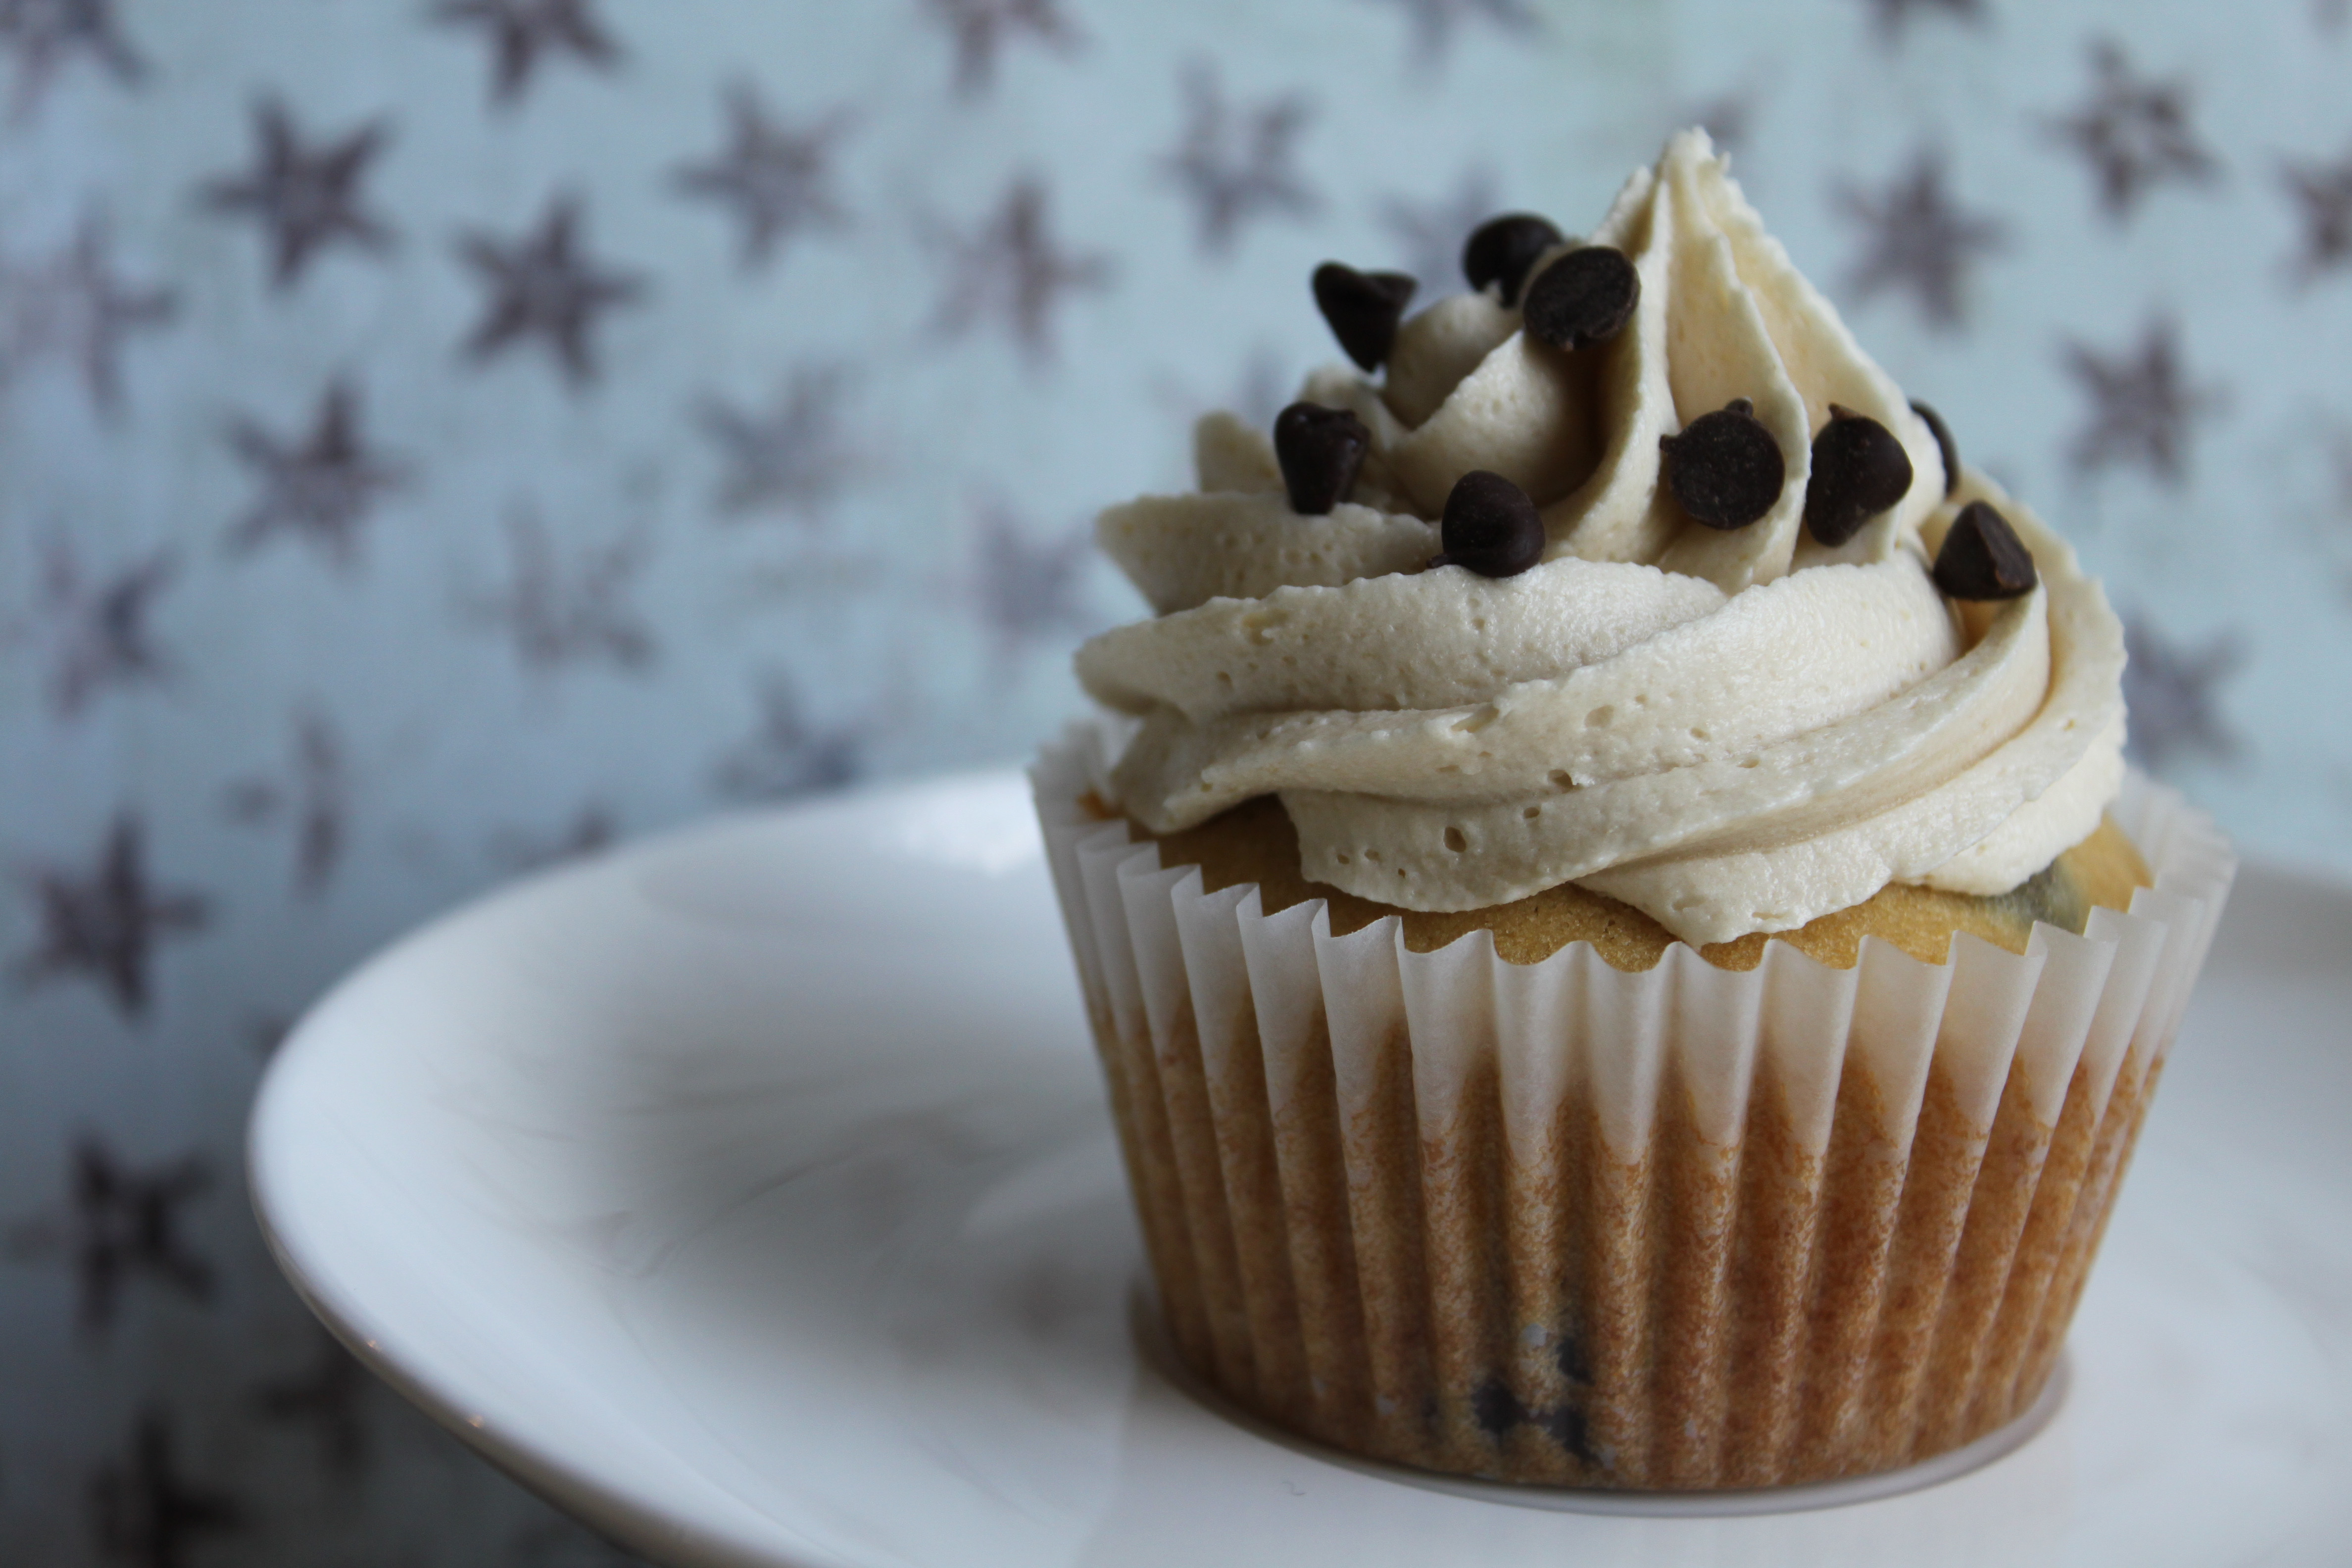 Chocolate Chip Cupcakes
 Chocolate Chip Cupcakes with Cookie Dough Frosting